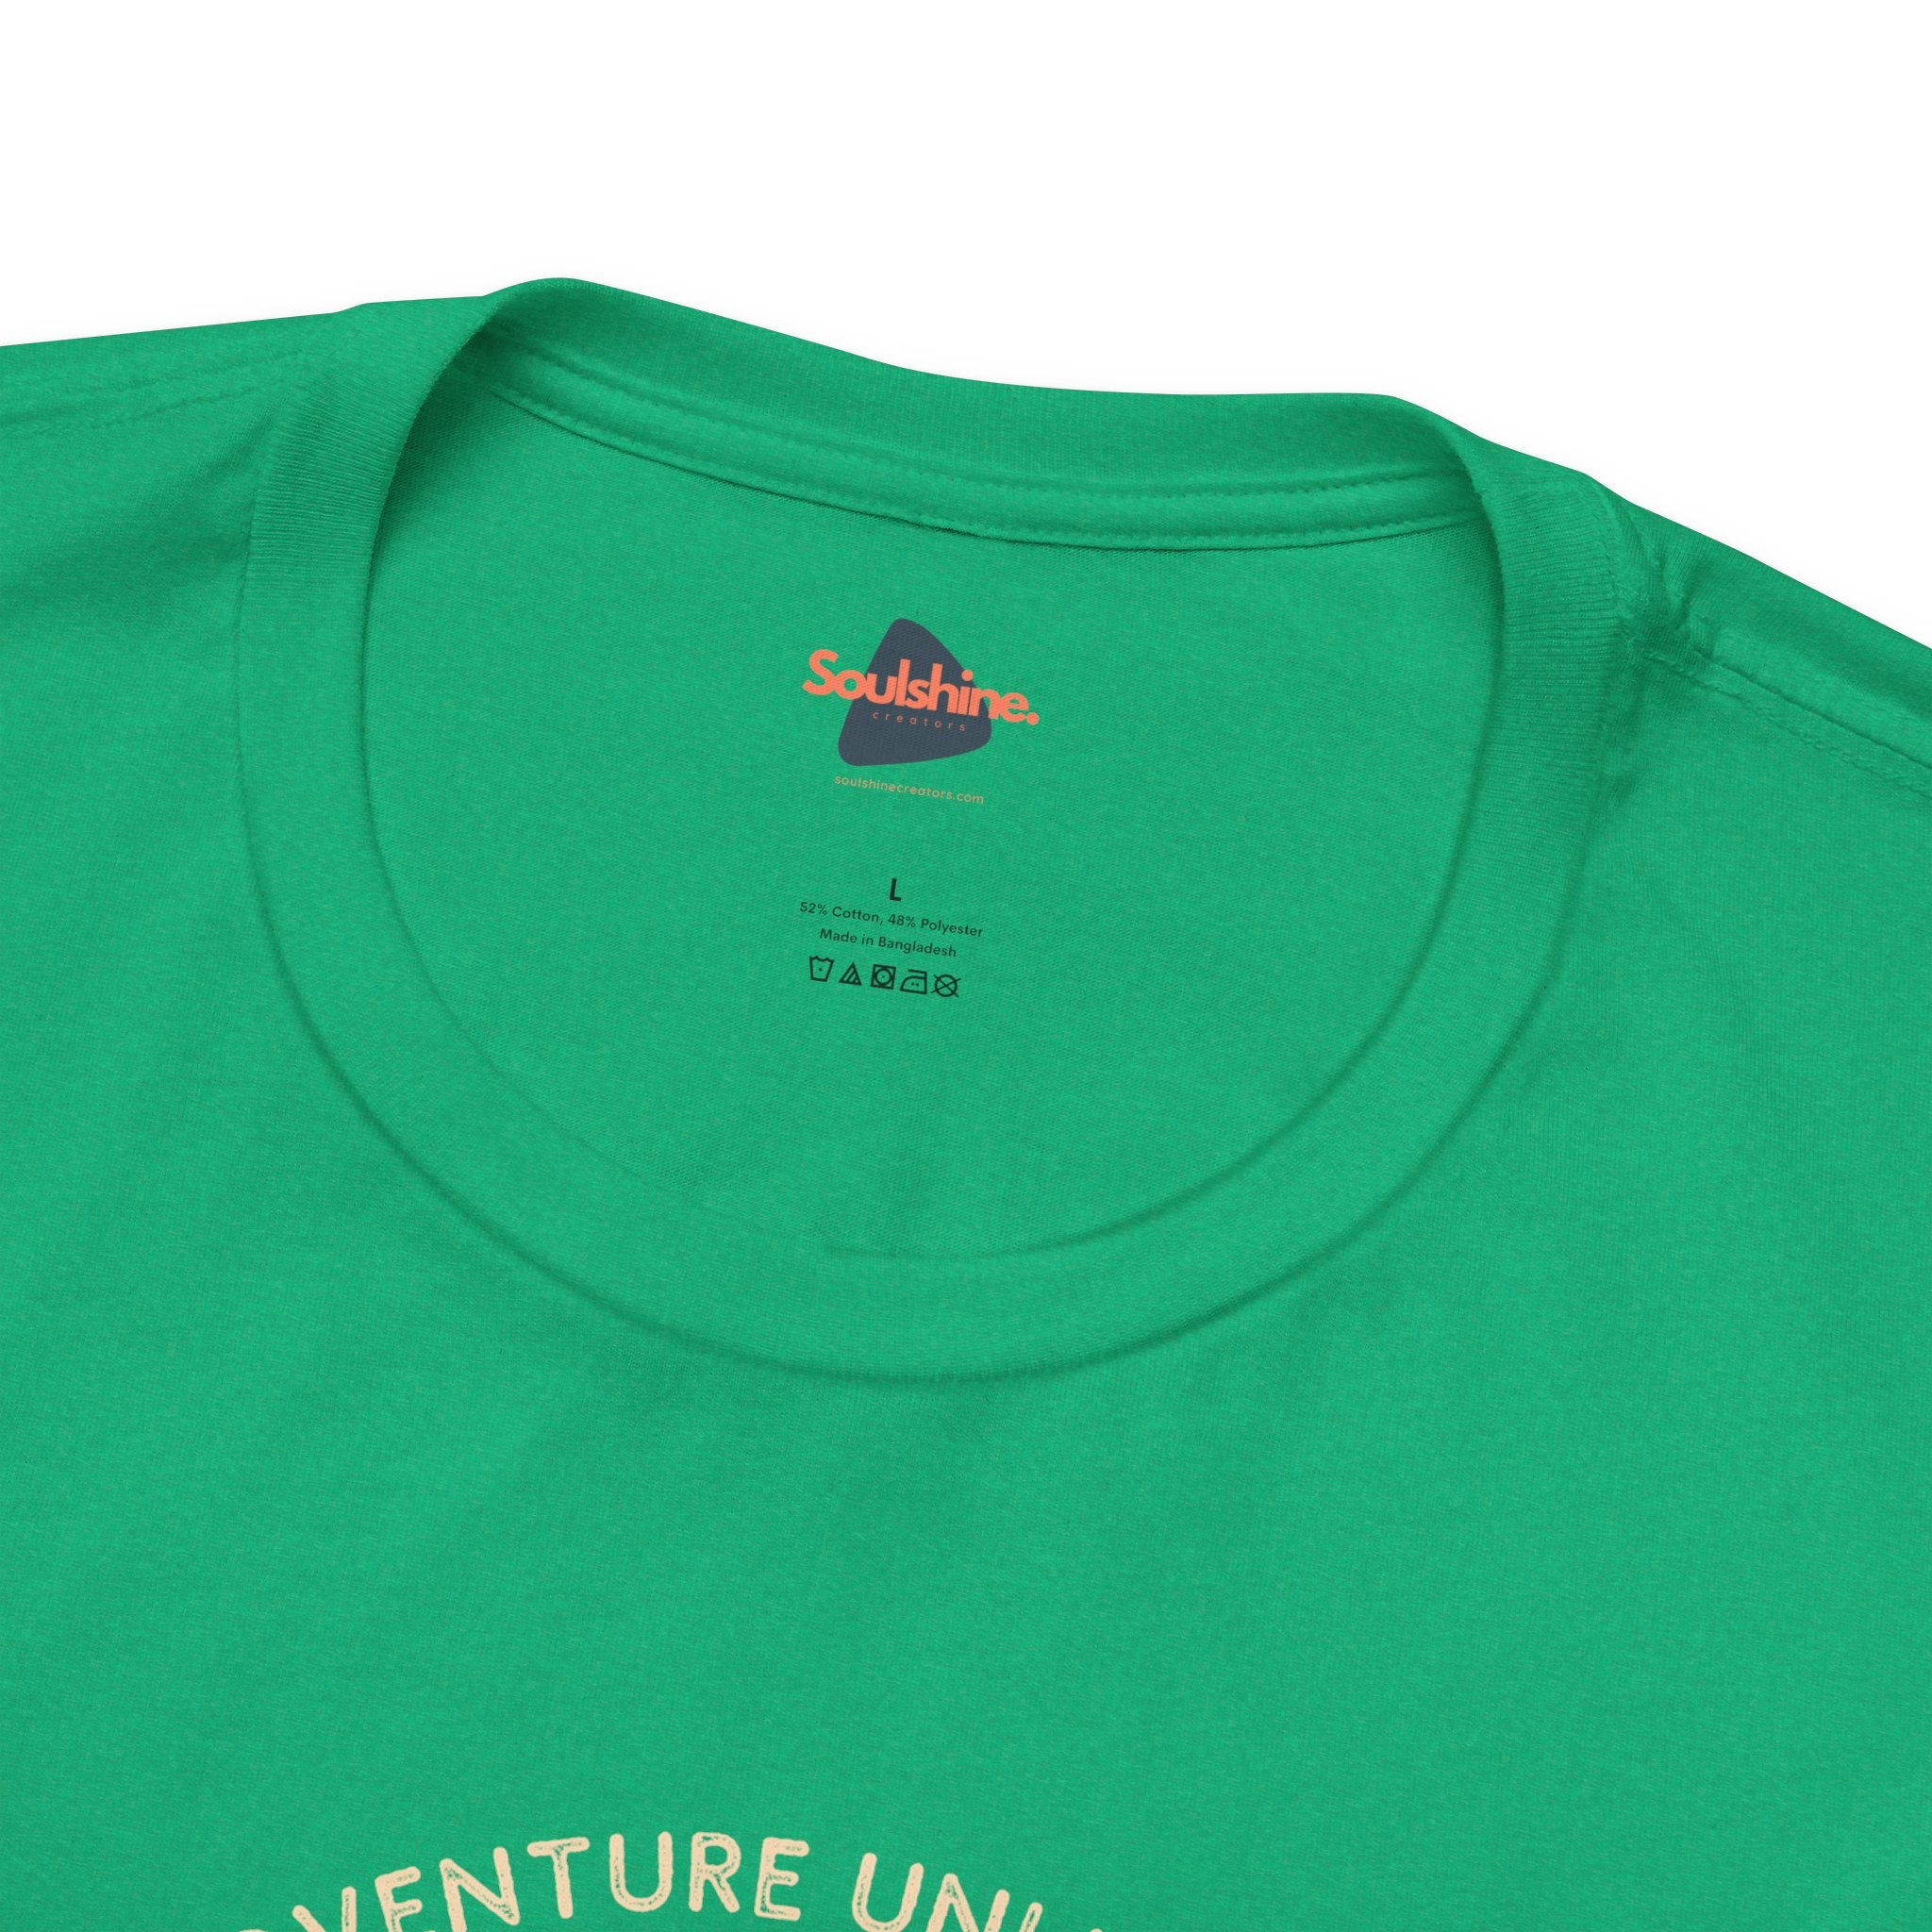 Adventure Unlimited green t-shirt with adventure words printed - Unisex Jersey Short Sleeve Tee - US